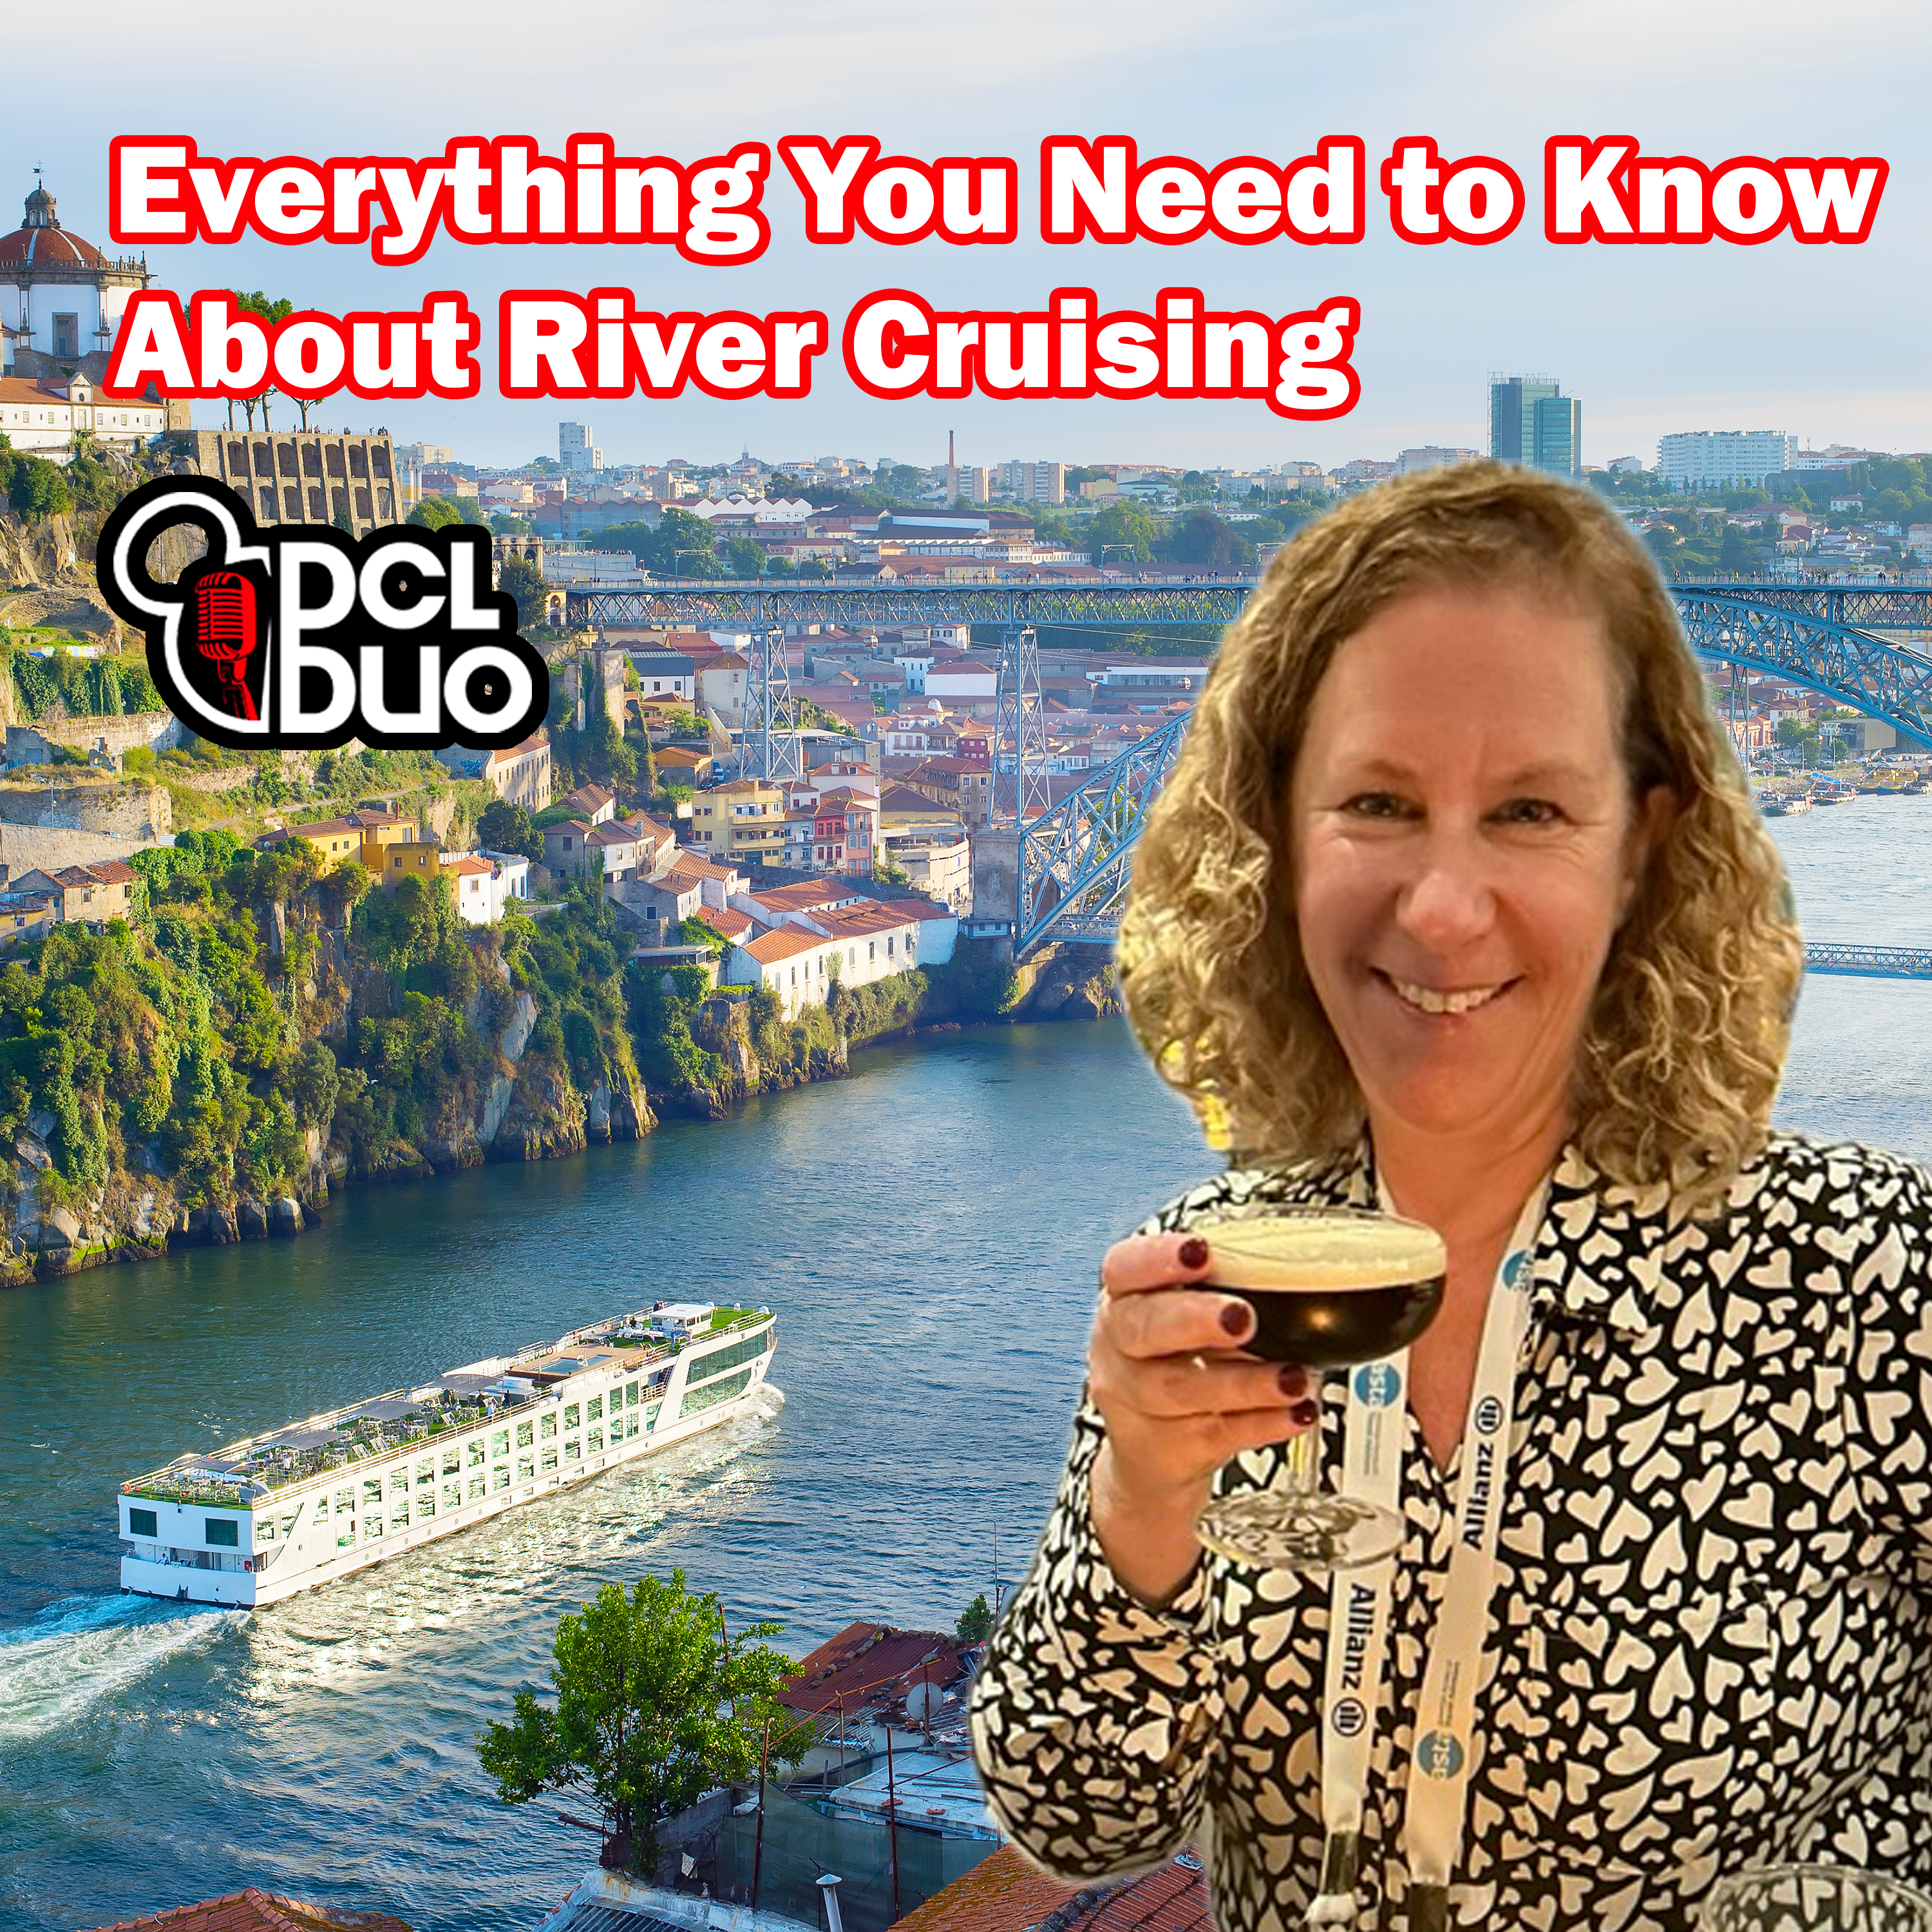 Ep. 424 - Live Bonus Show - Current Affairs: Everything You Need to Know About River Cruising